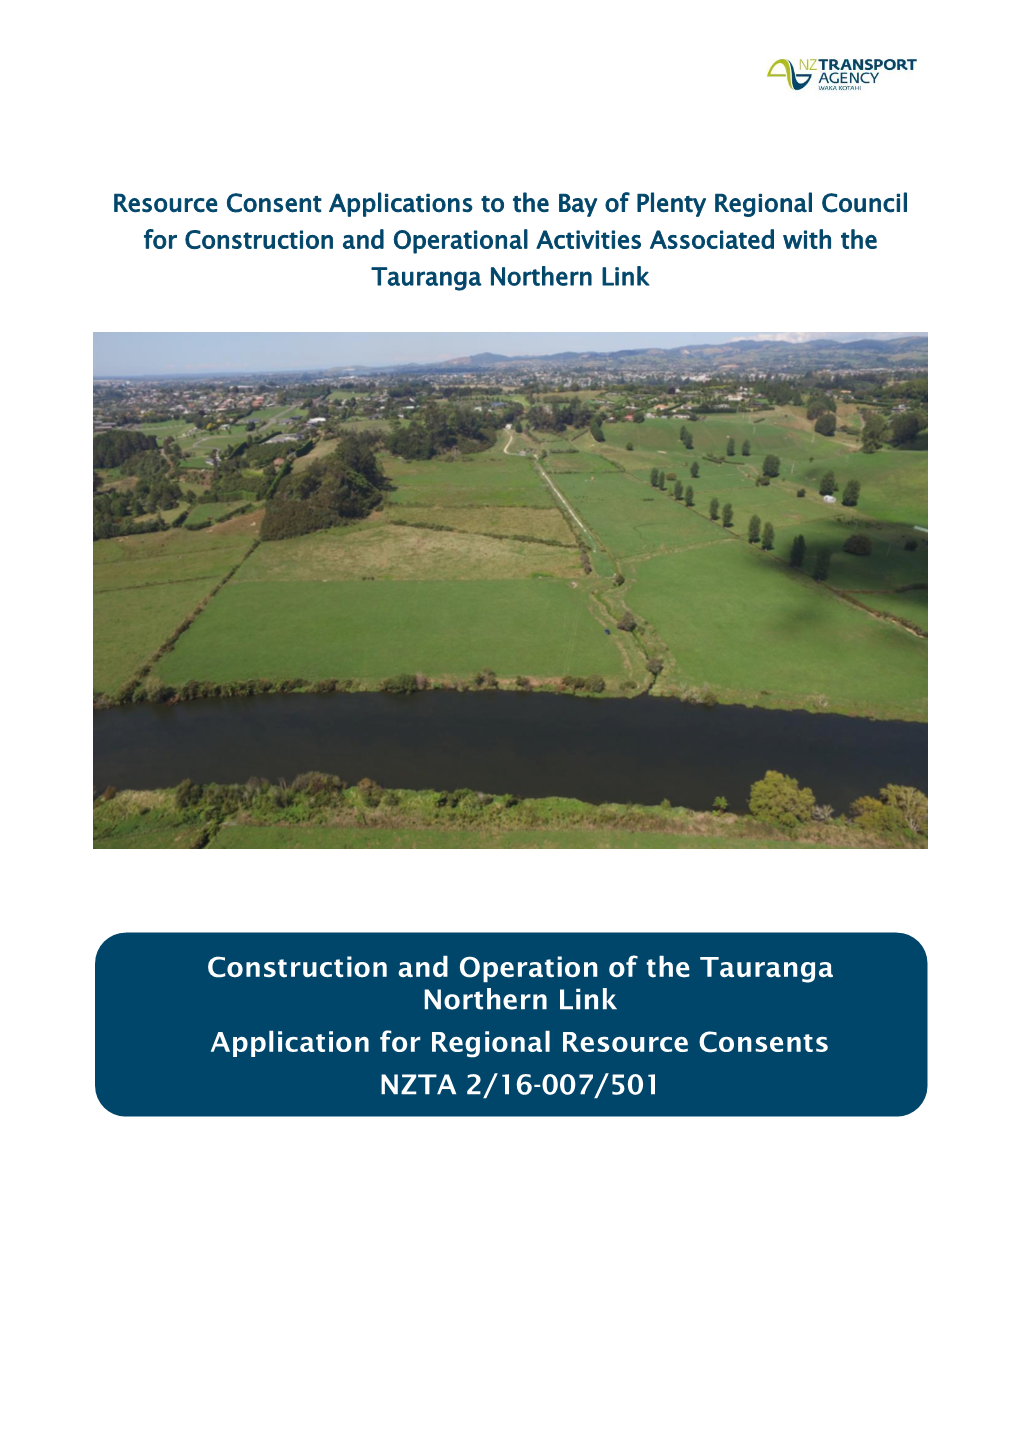 Construction and Operation of the Tauranga Northern Link Application